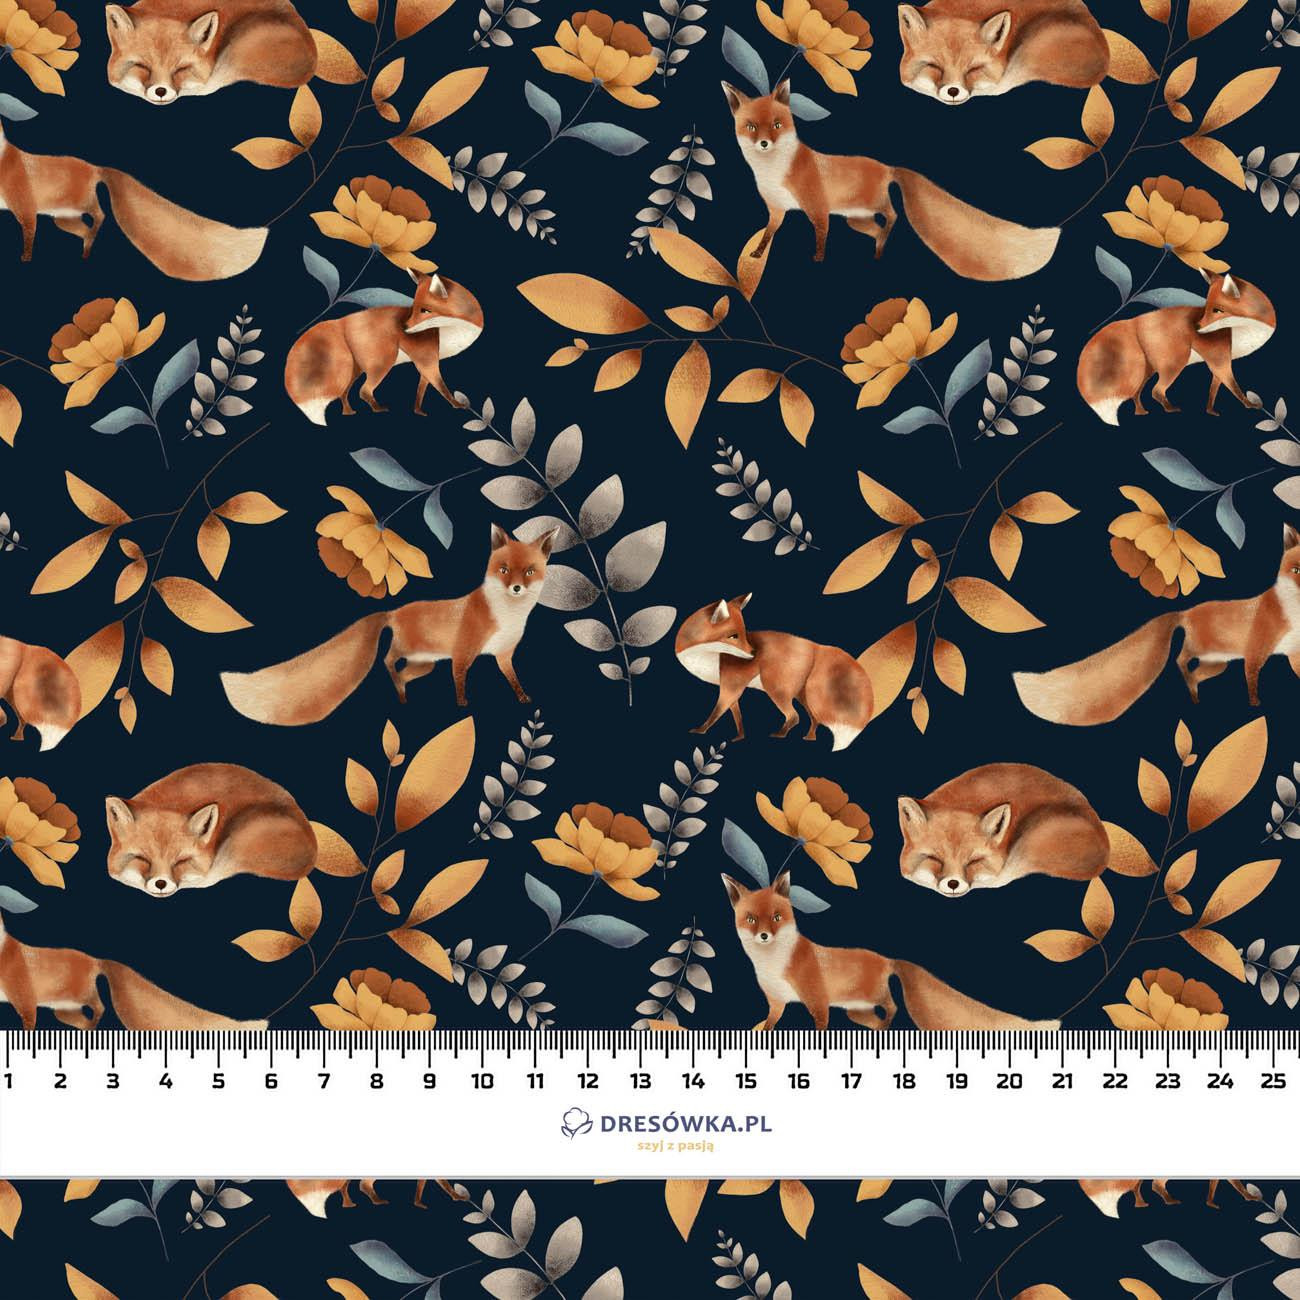 FOX TIME (INTO THE WOODS) - Waterproof woven fabric